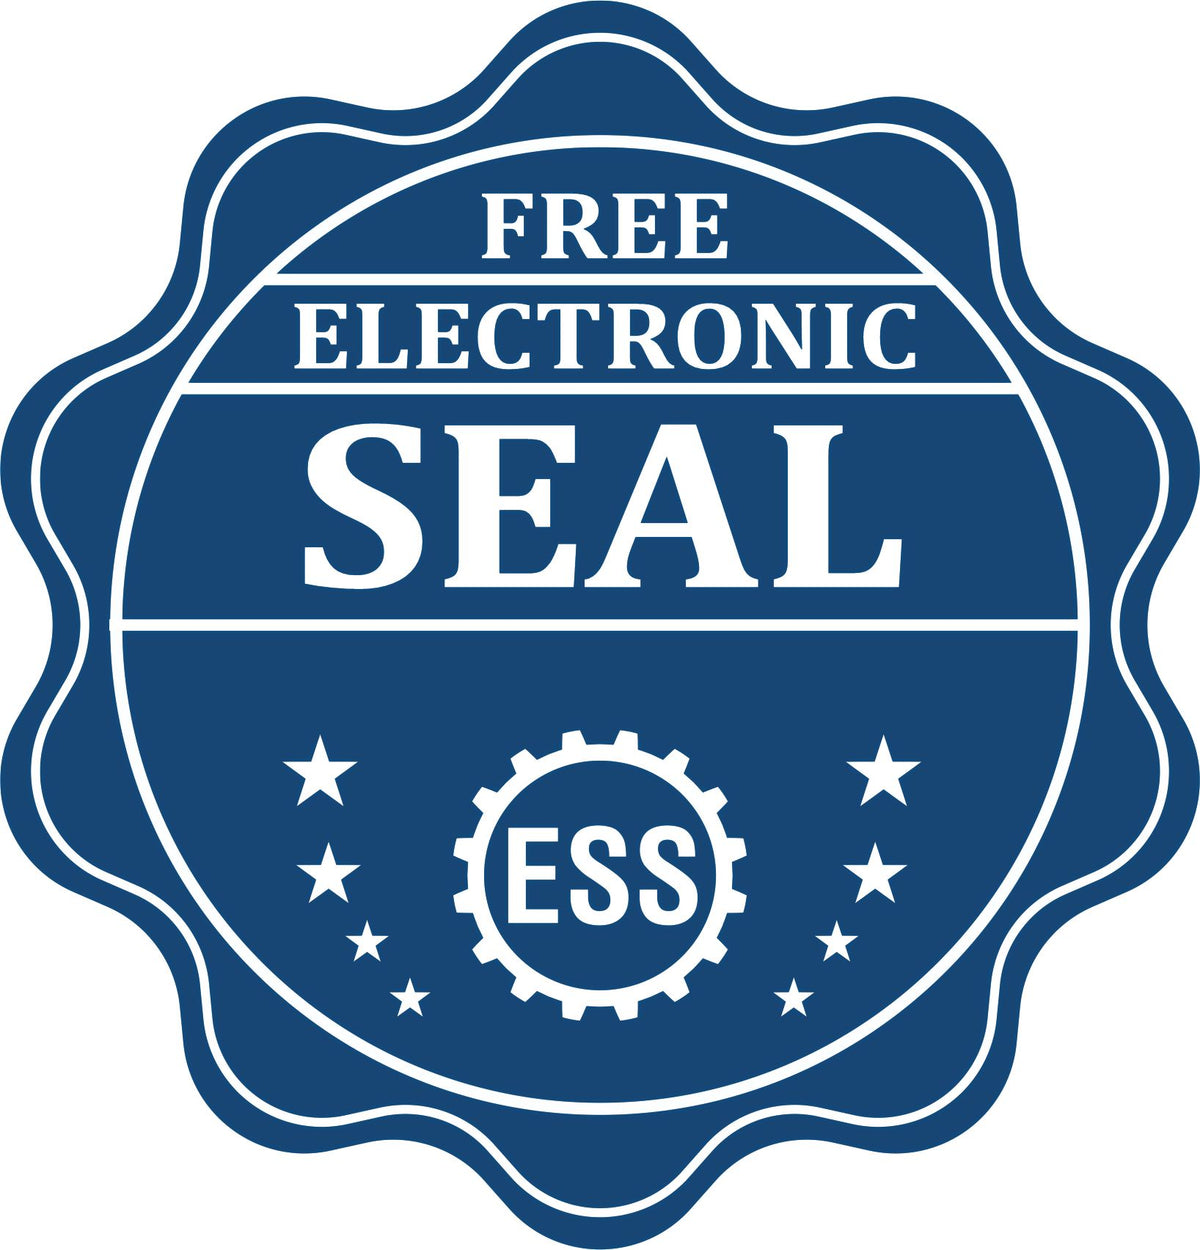 A badge showing a free electronic seal for the Handheld Kansas Professional Engineer Embosser with stars and the ESS gear on the emblem.